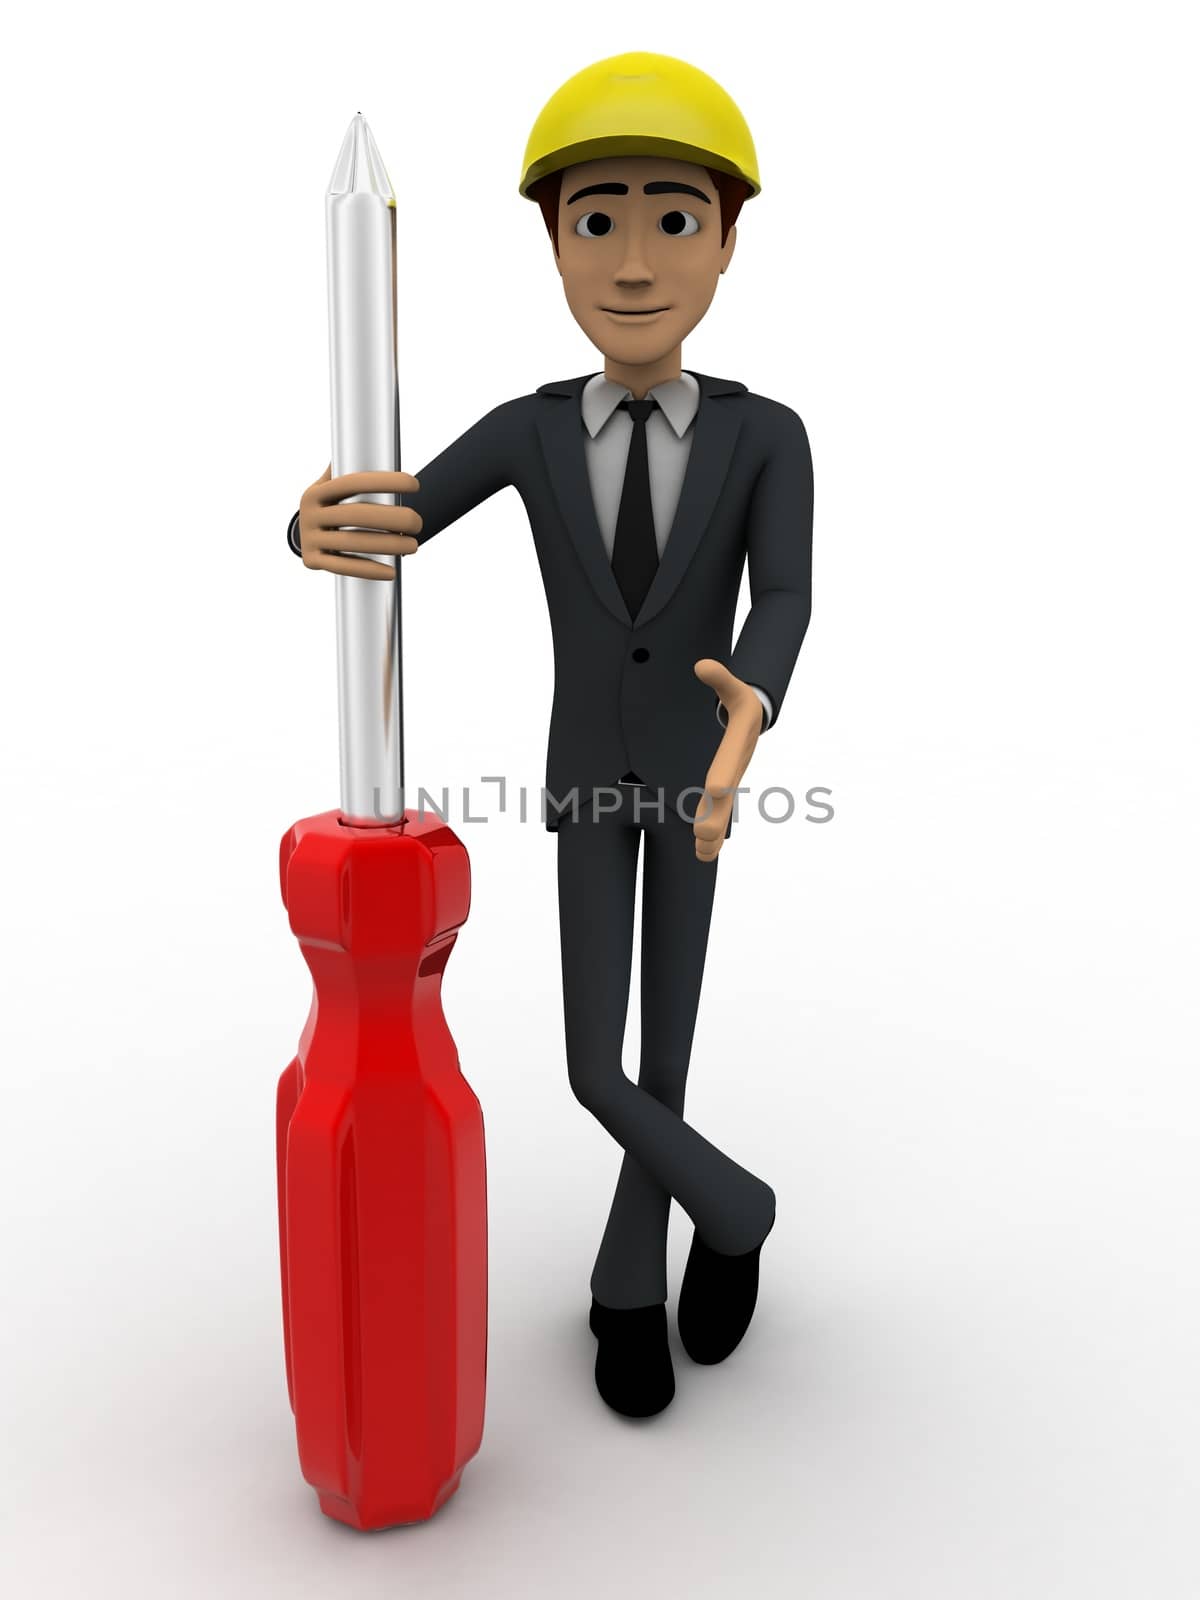 3d man repairman  with screw driver concept by touchmenithin@gmail.com